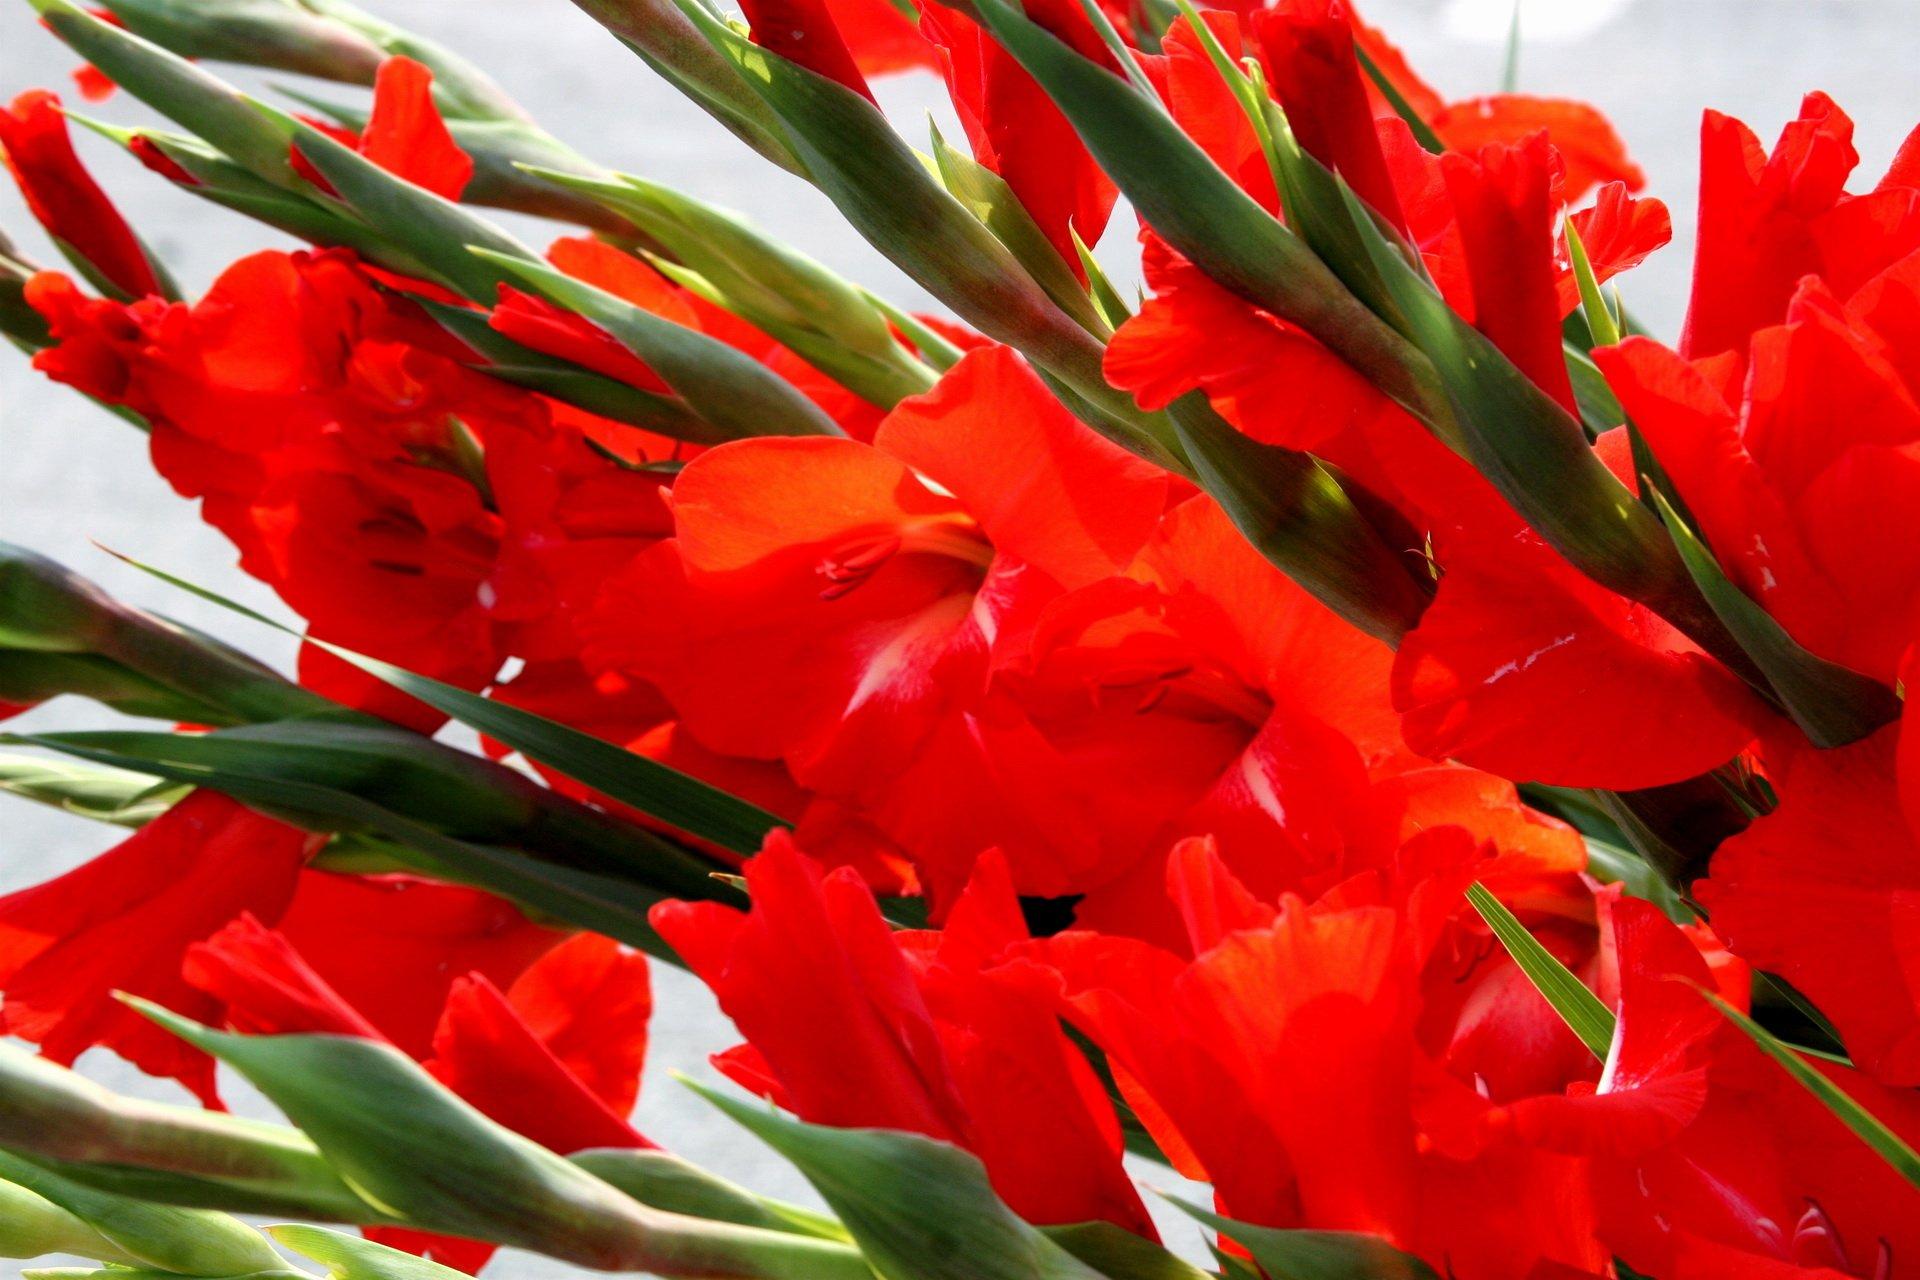 Gladiolus are flowering plants in the iris family. HD Wallpaper